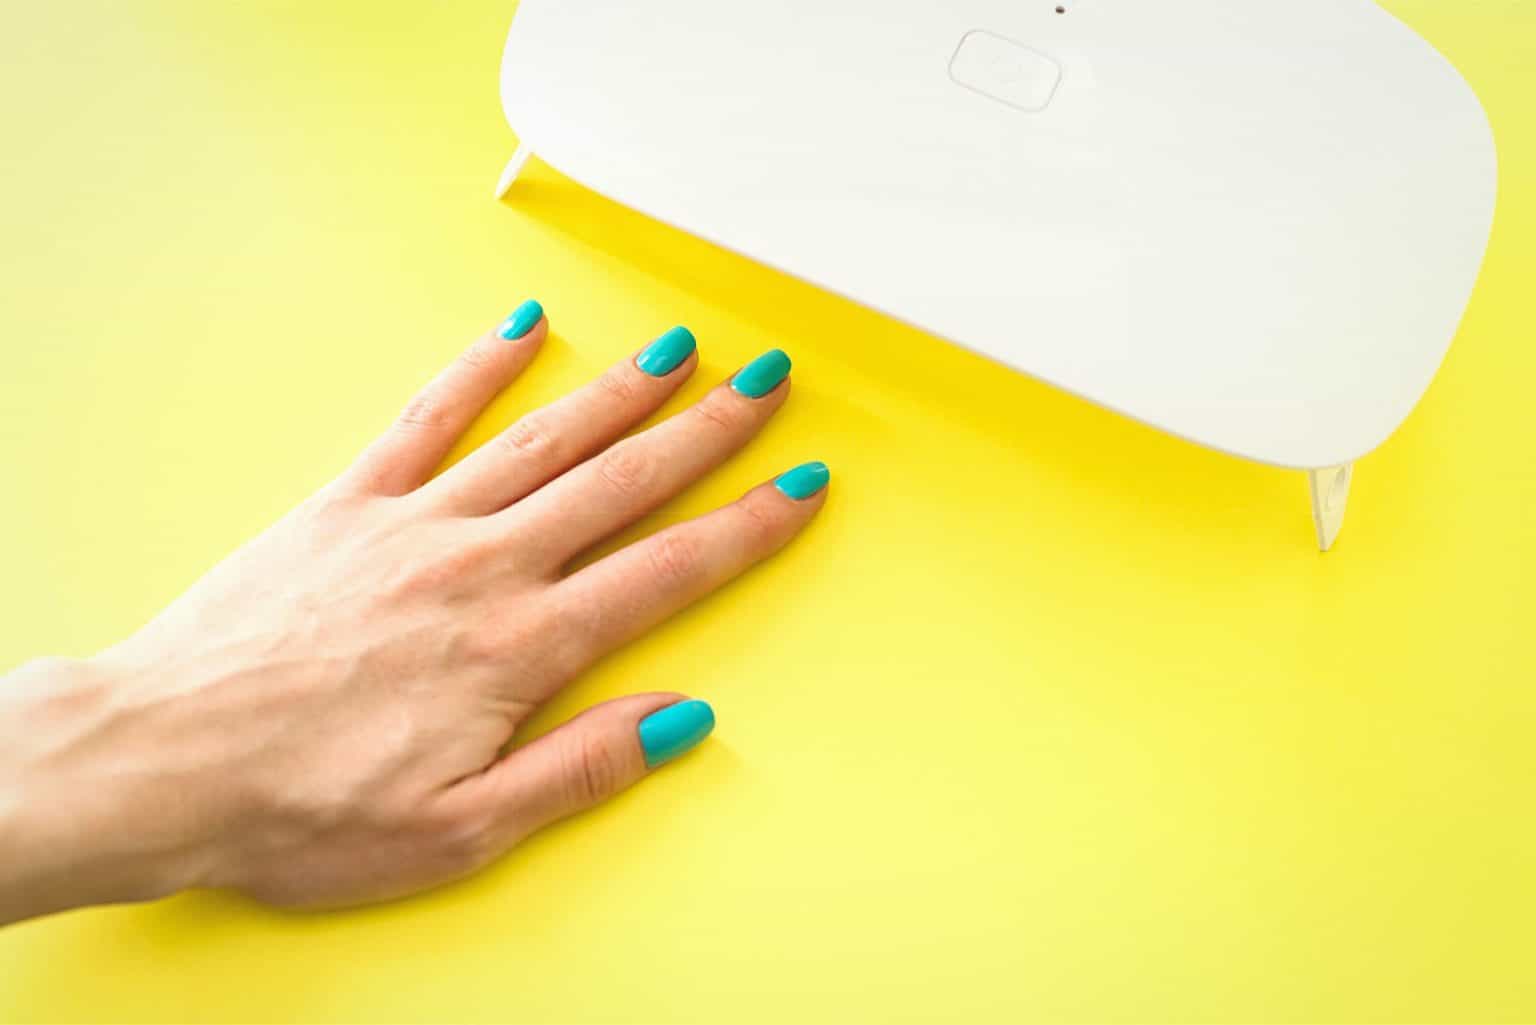 How to Make Your Nail Design Stand Out: Facing In or Out? - wide 9